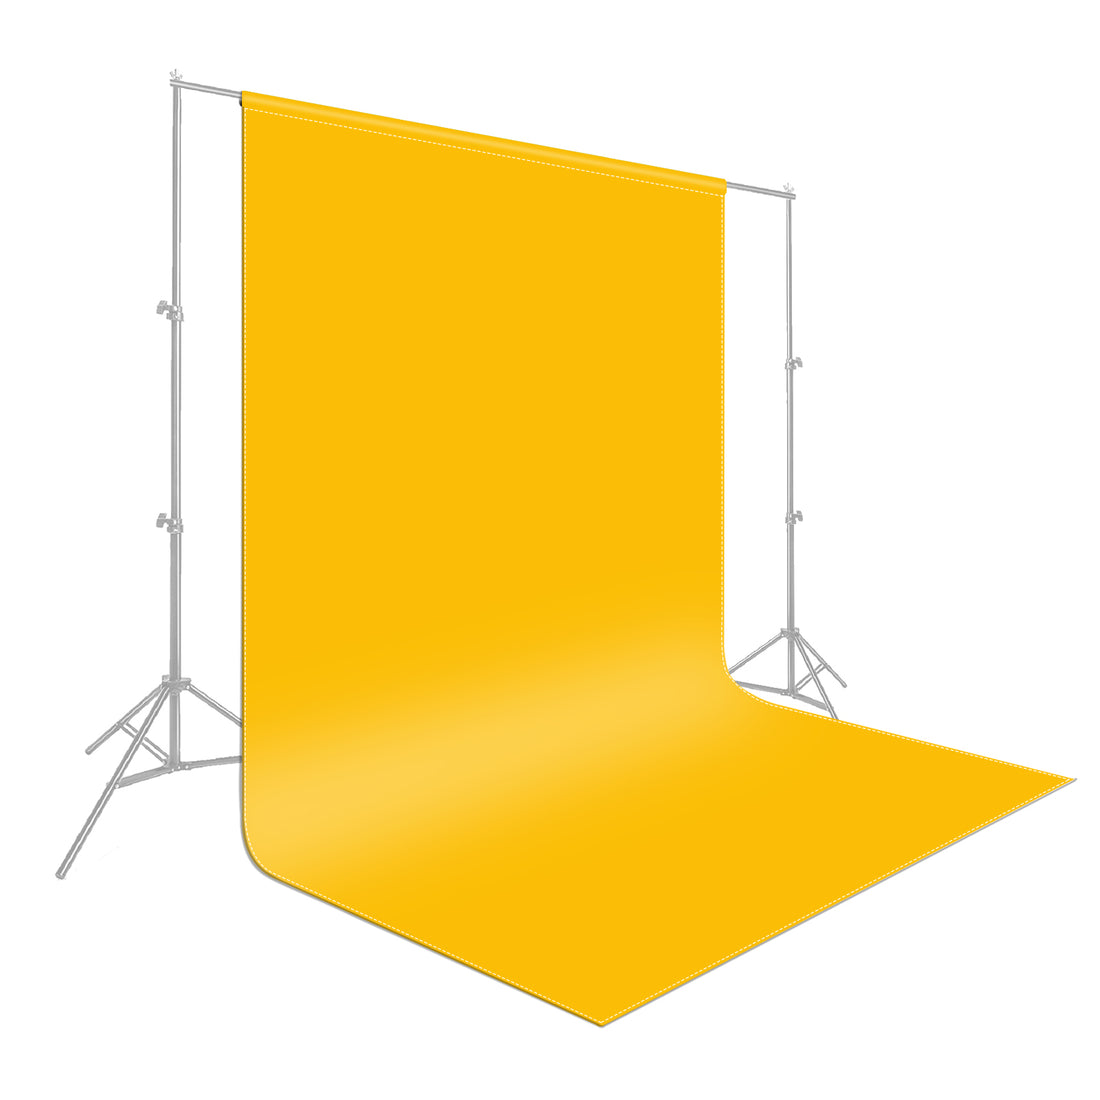 Avezano Yellow Solid Color Photography Backdrop